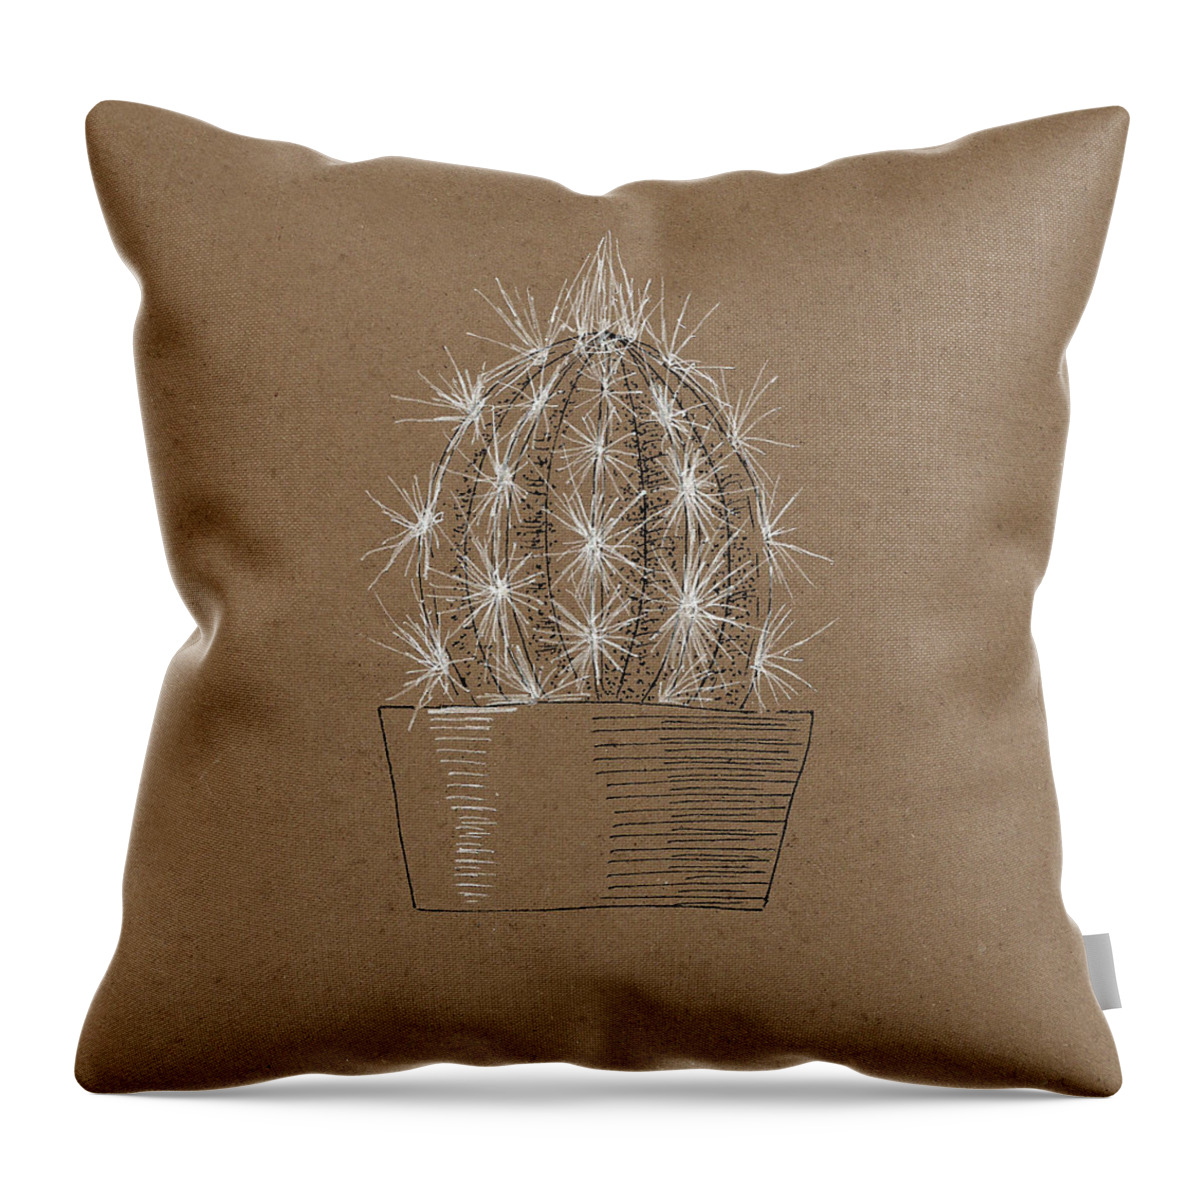 Cactus Throw Pillow featuring the drawing Cactus 4 by Masha Batkova